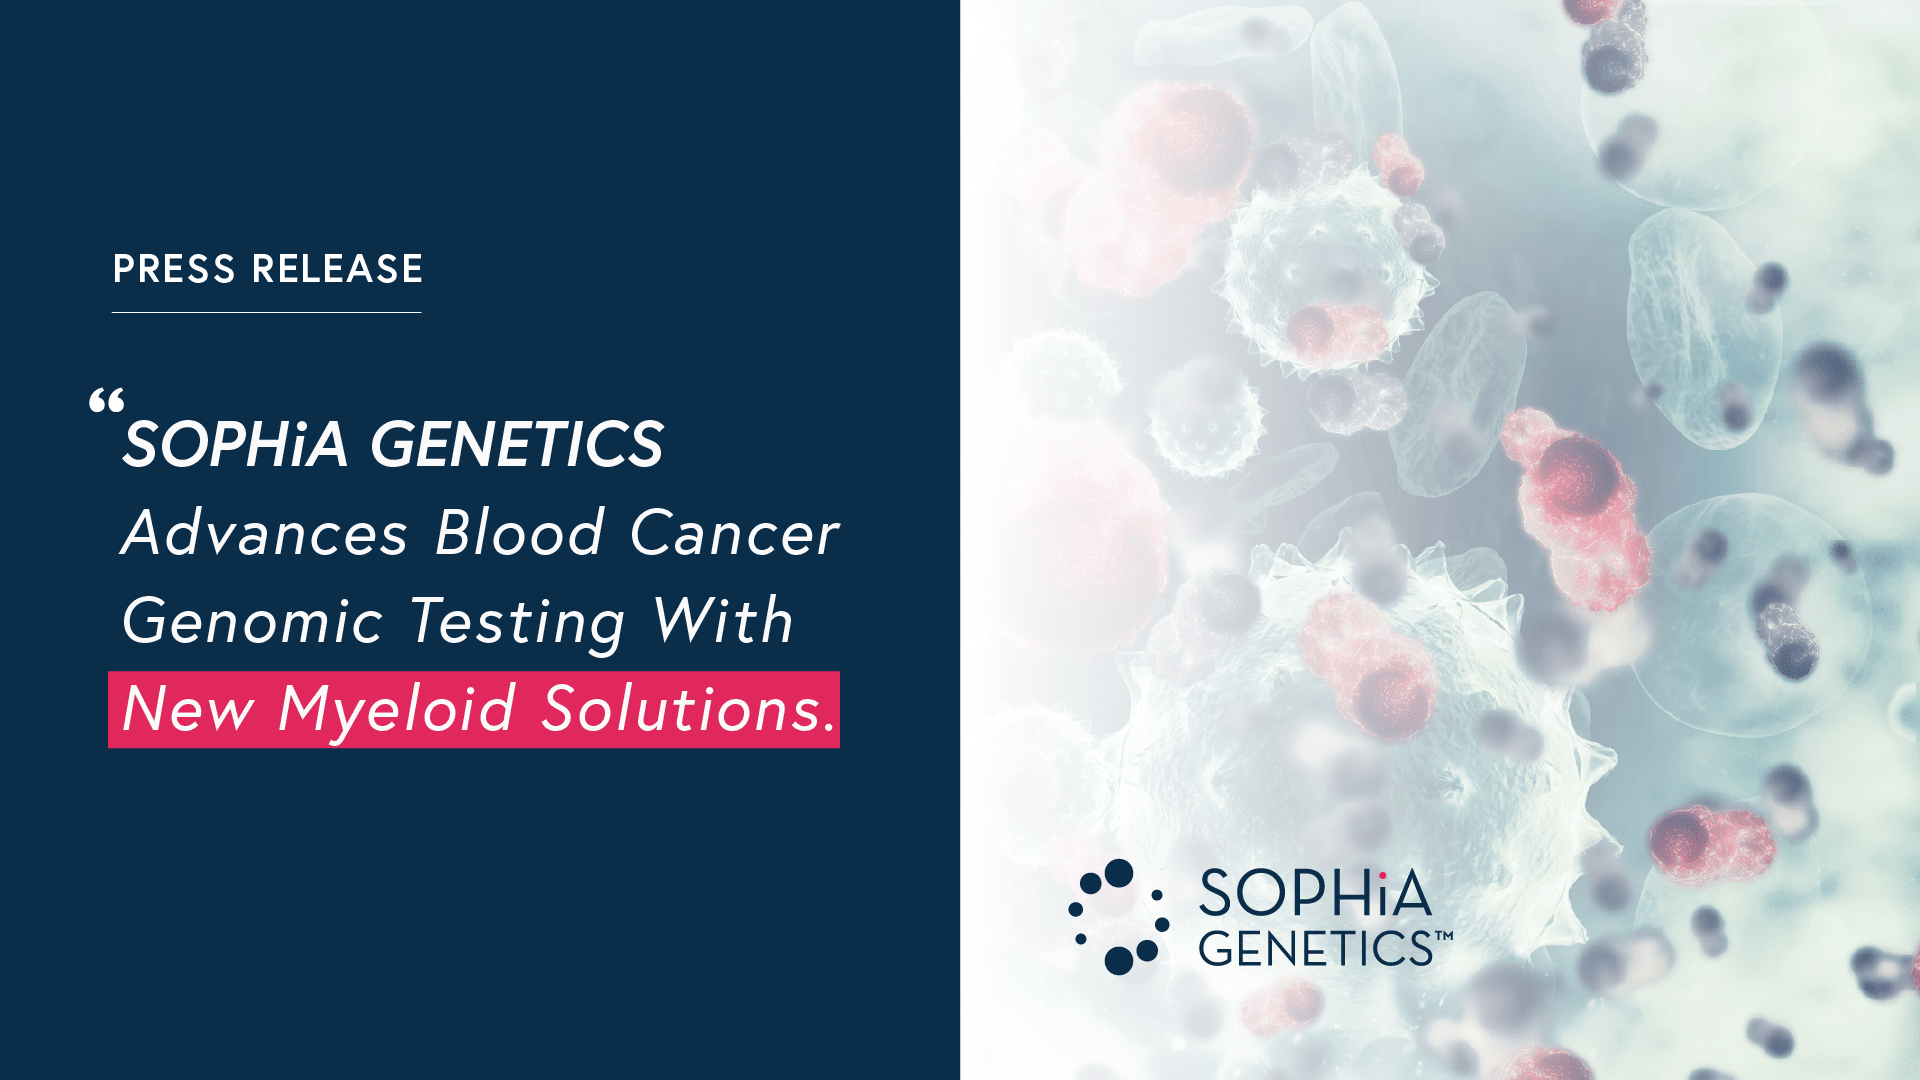 SOPHiA GENETICS advances blood cancer genomic testing with new myeloid solutions